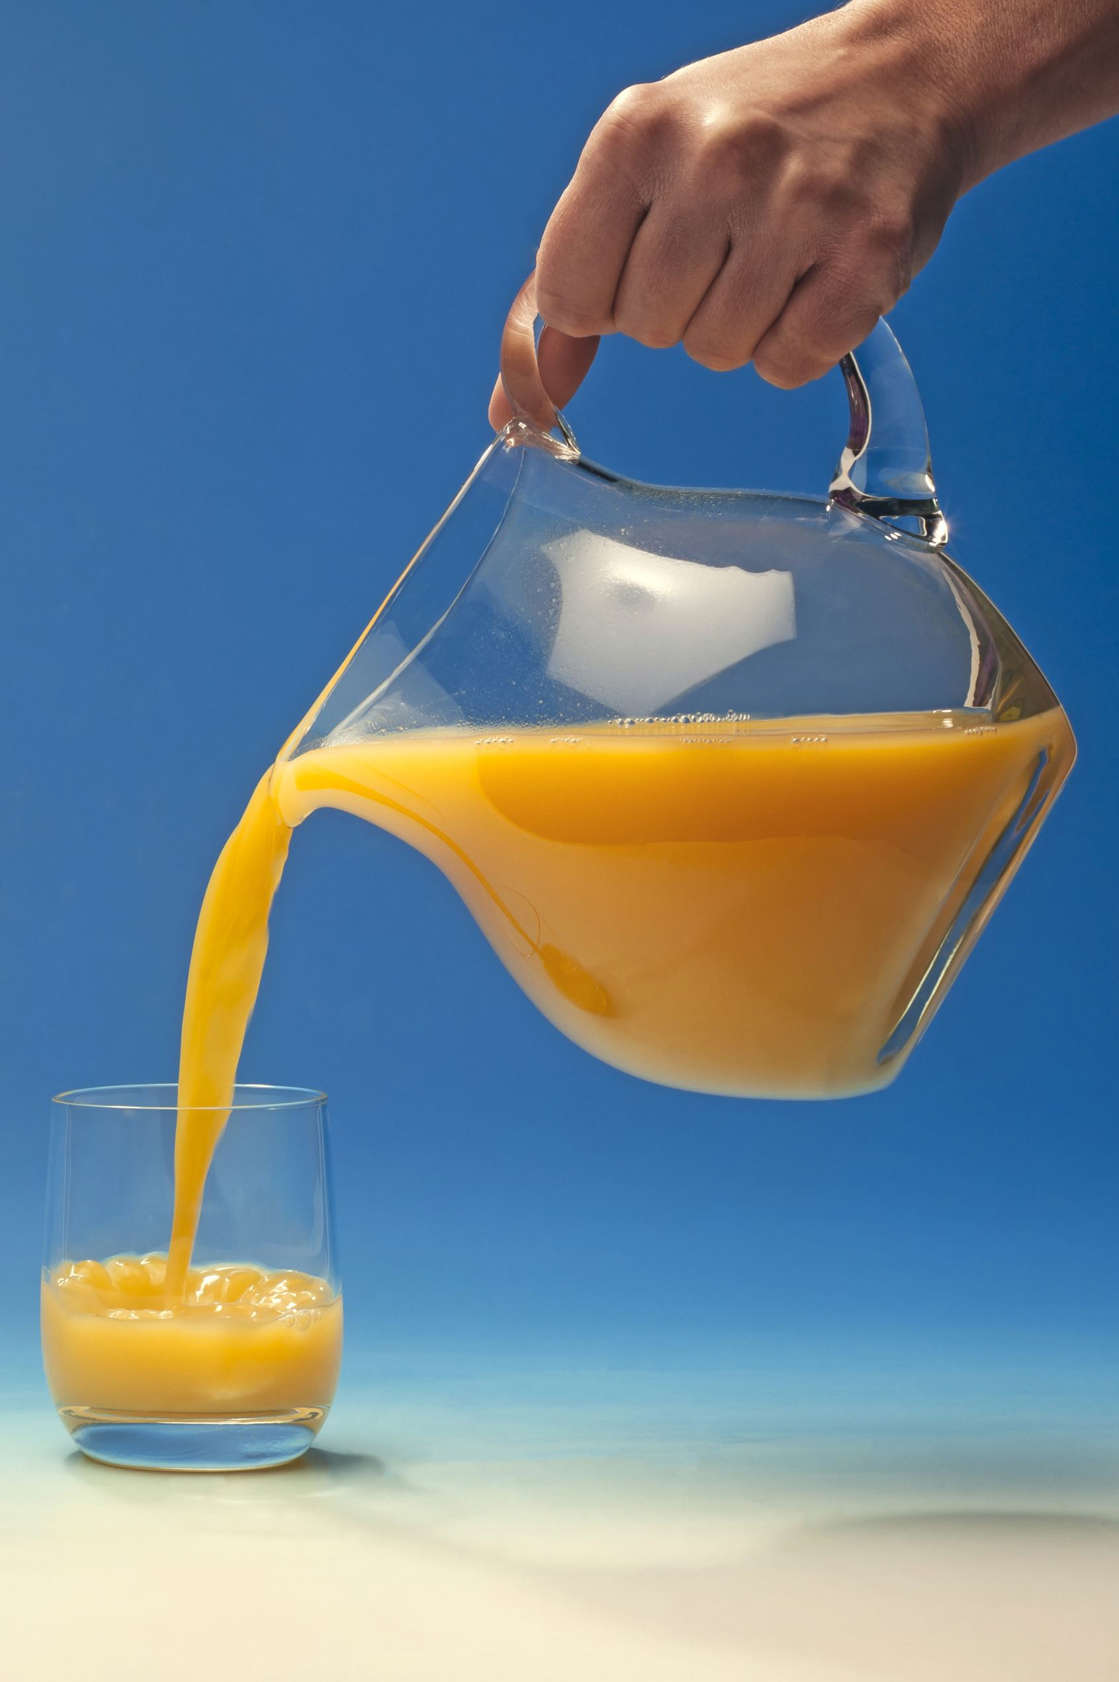 Hand pouring orange juice out of a jug into a glass